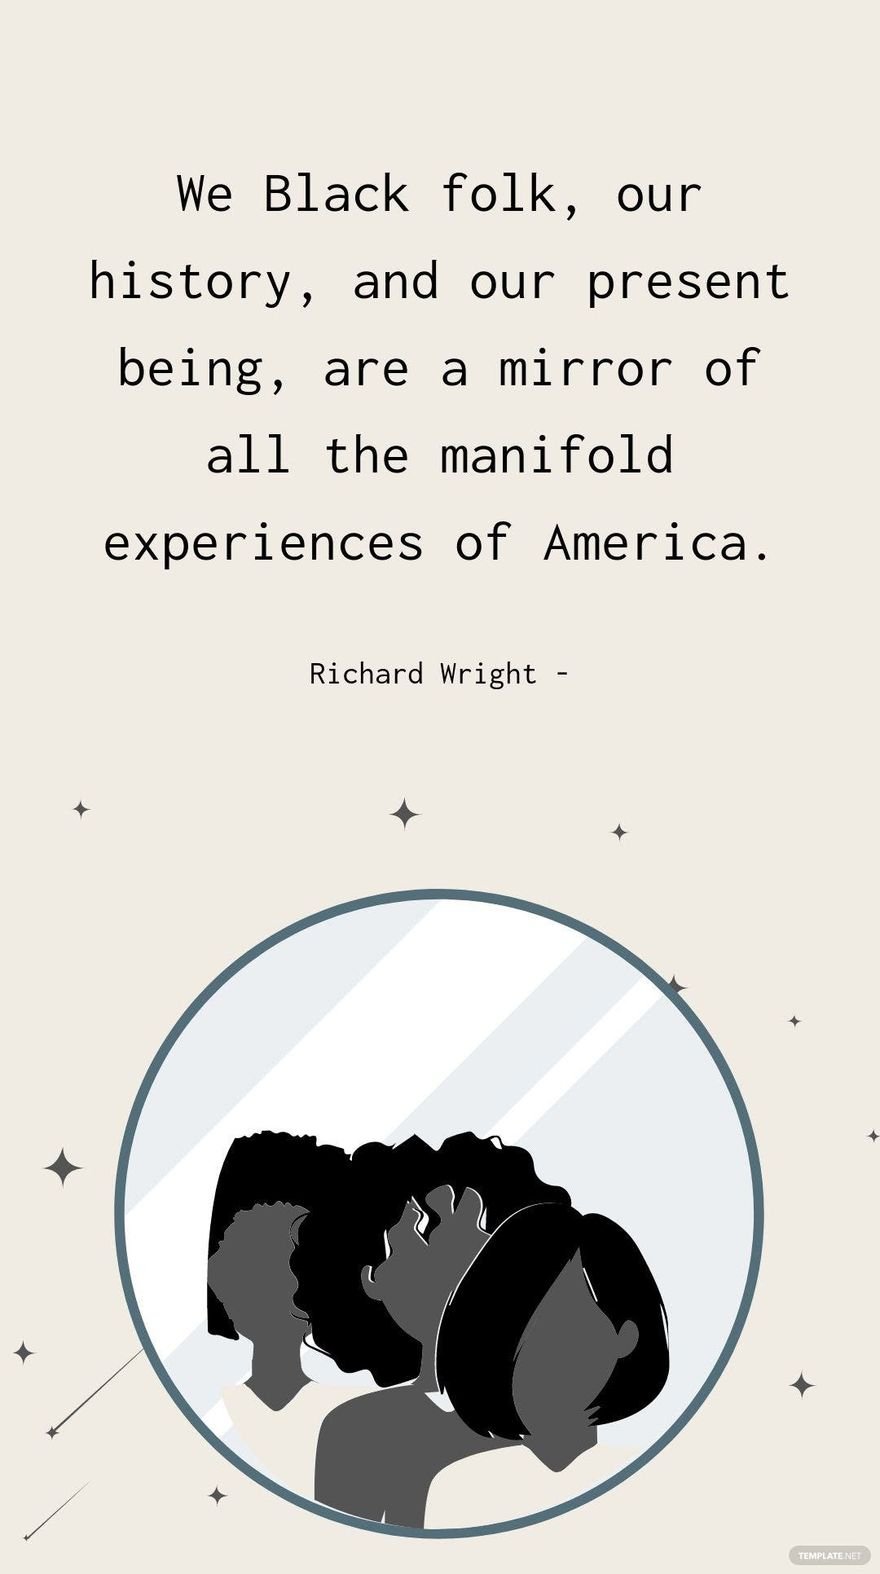 Free Richard Wright - We Black folk, our history, and our present being, are a mirror of all the manifold experiences of America.